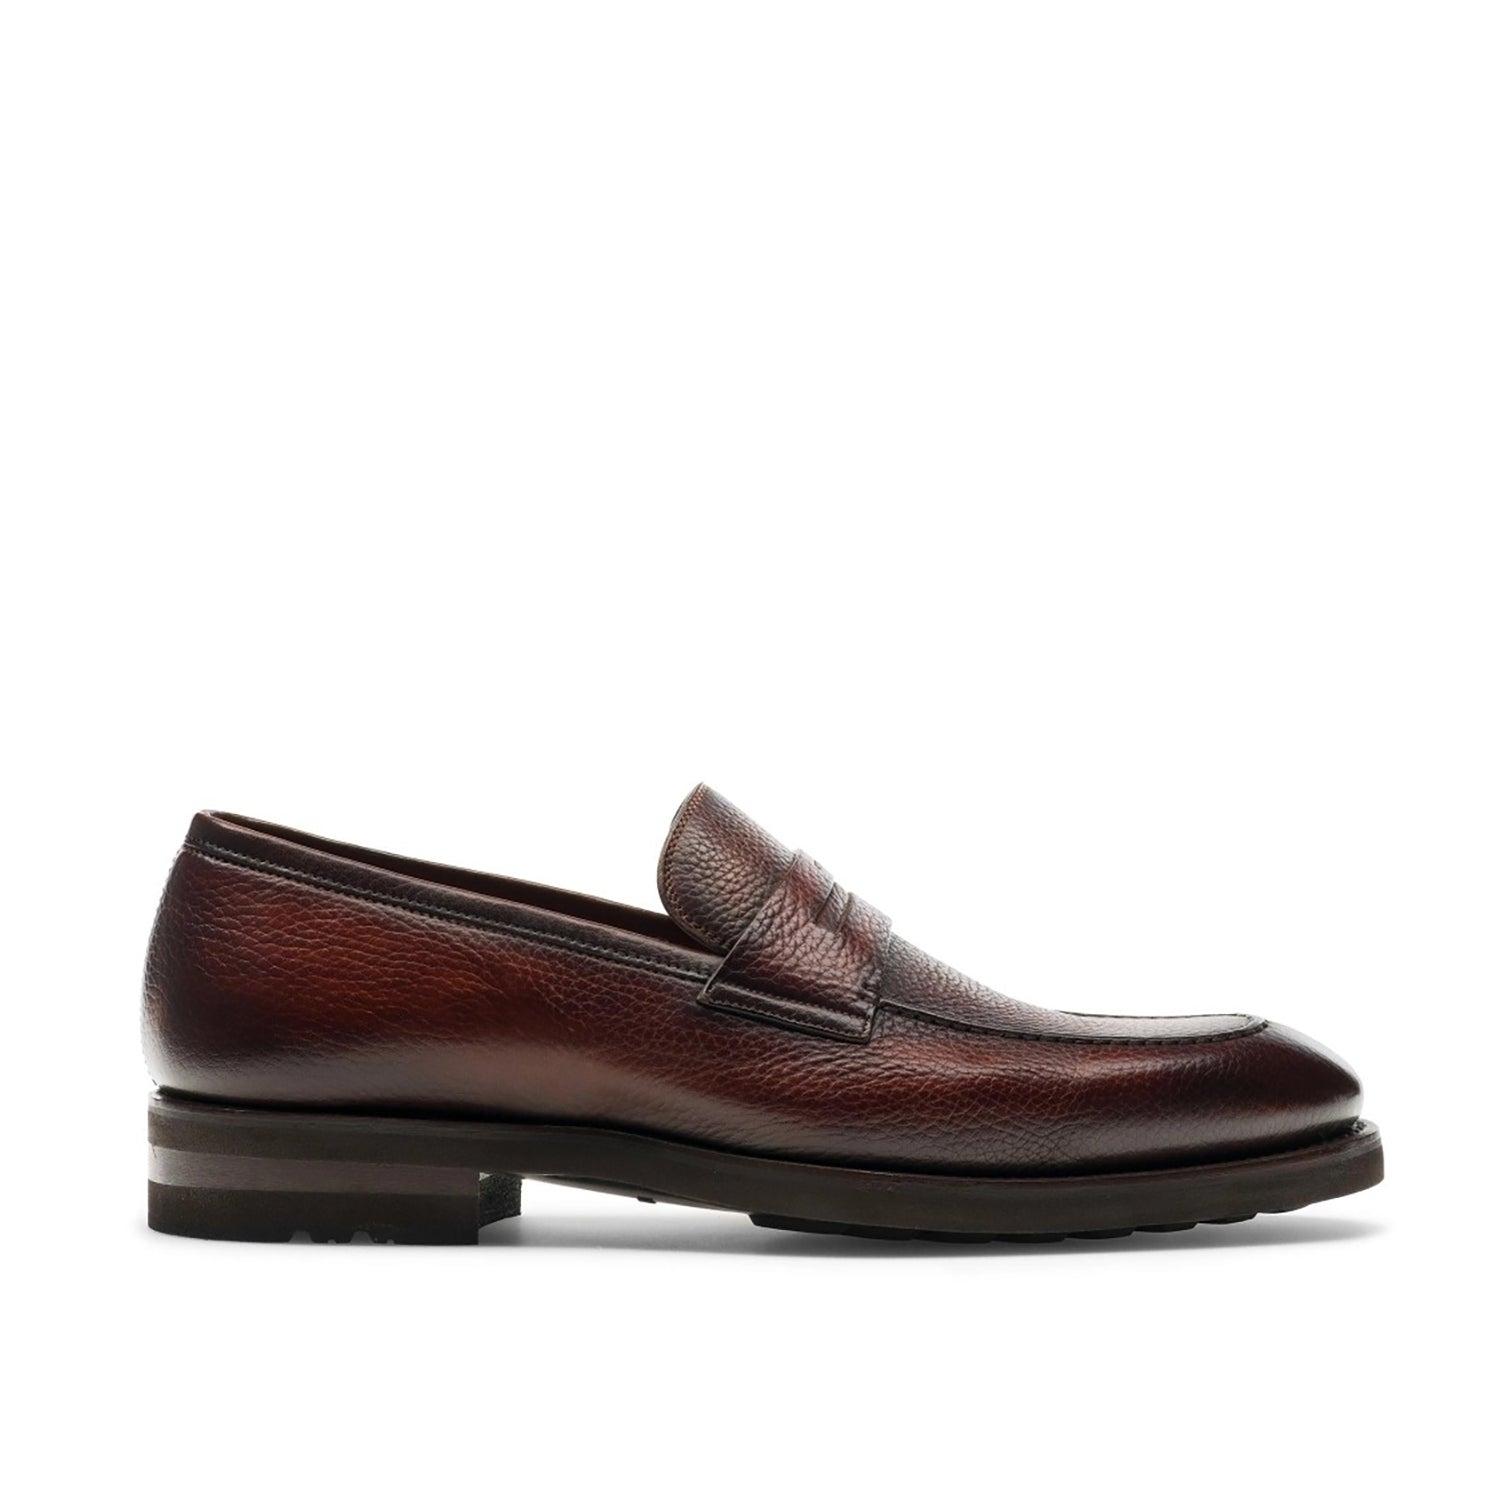 Magnanni Matlin Iii 24671 Shoes Full Grain Leather Casual Penny Loafers ...